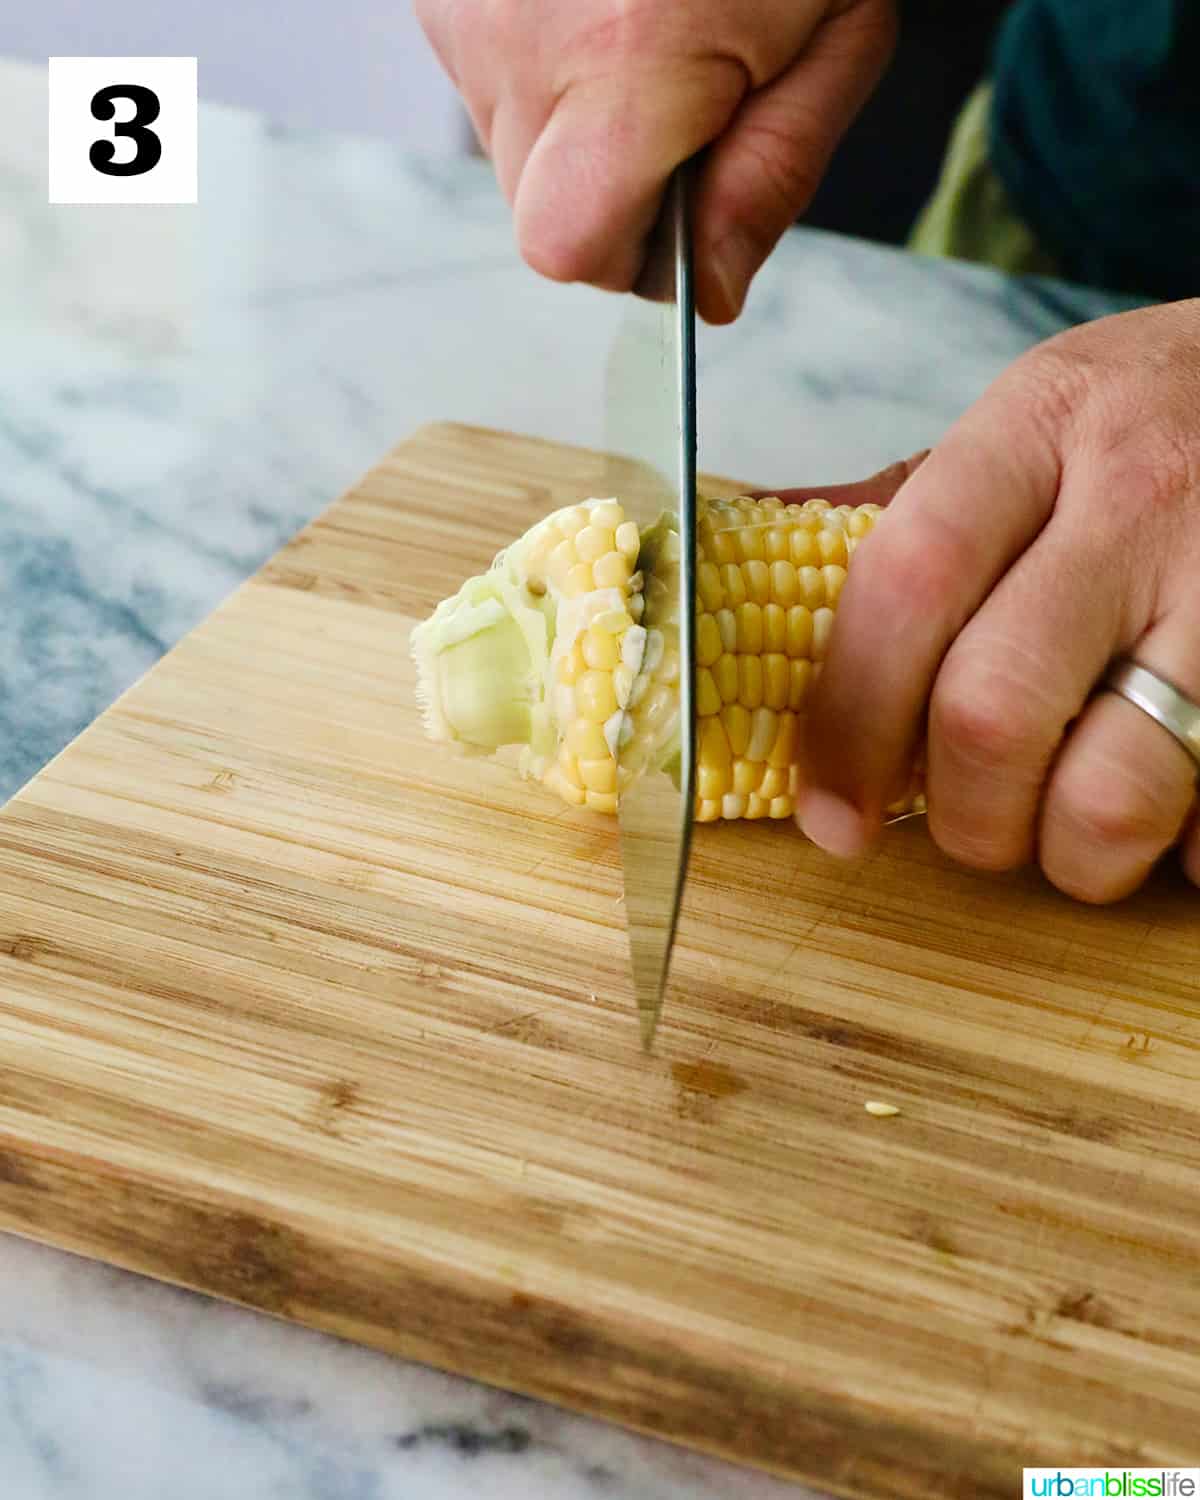 hands using a knife to slice off the end of a corn cob on a cutting board.